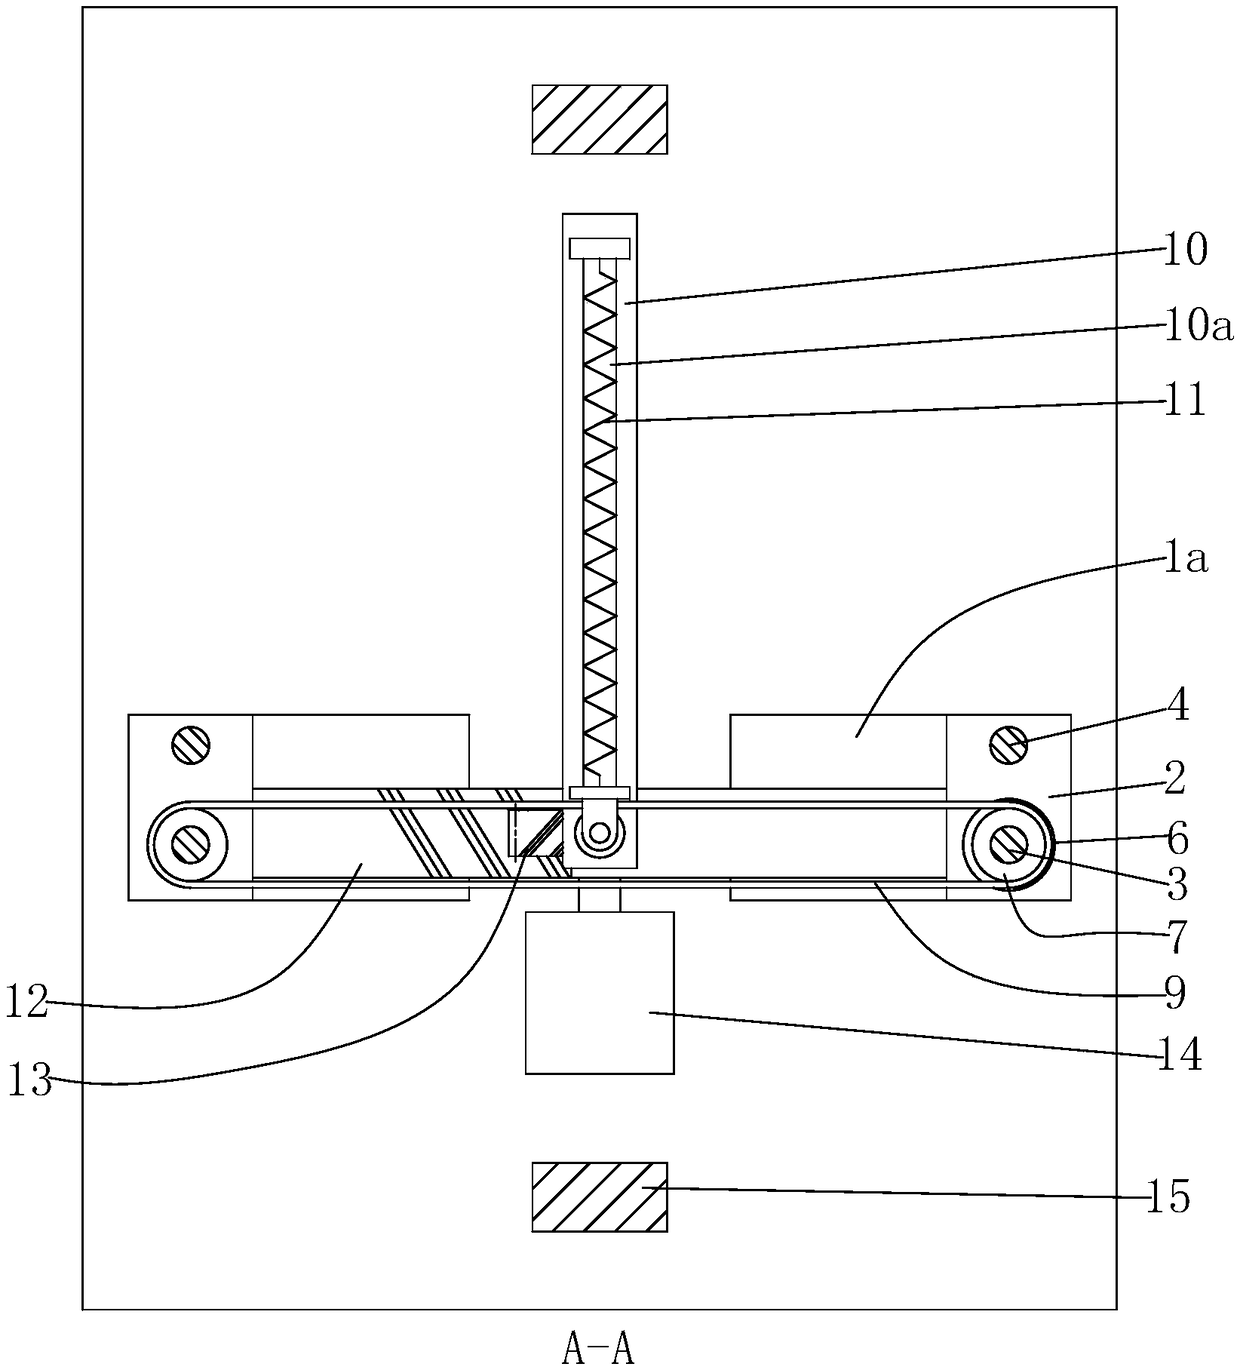 Reciprocating type uniform waxing device for textile production